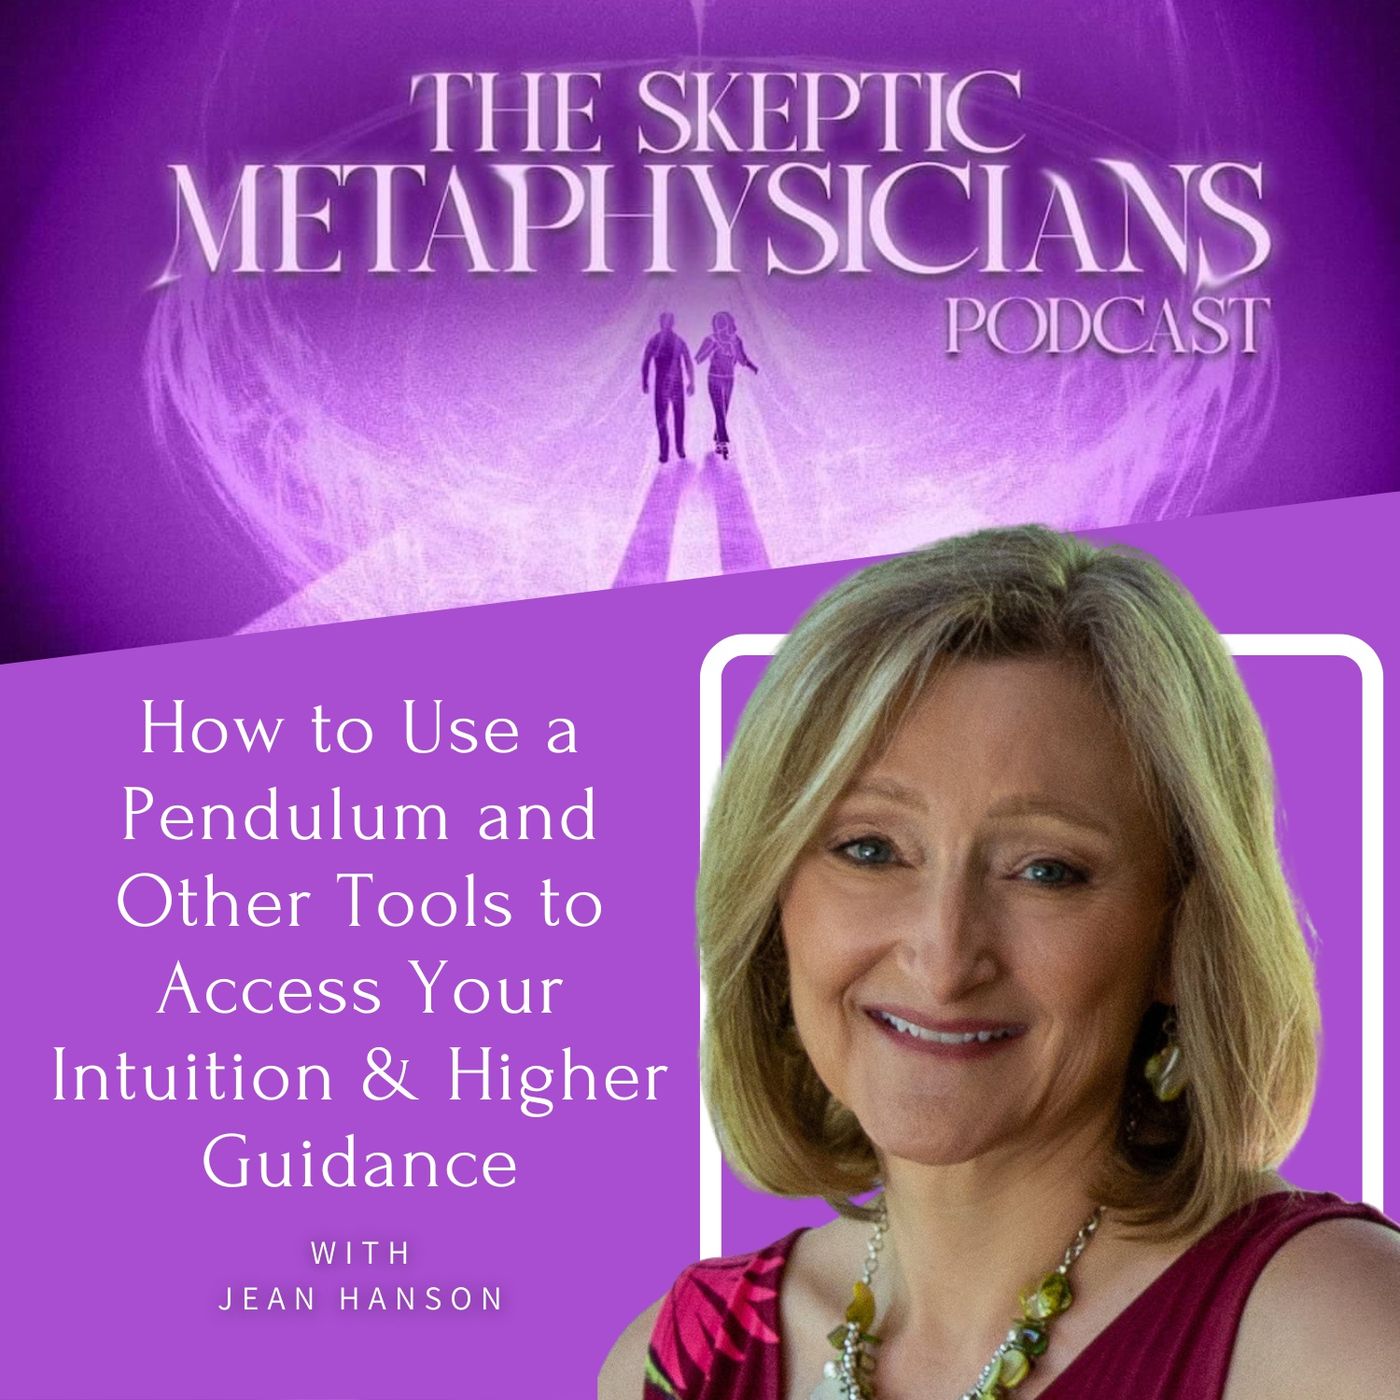 How to Use a Pendulum and Other Tools to Access Your Intuition and Higher Guidance | Jean Hanson Image